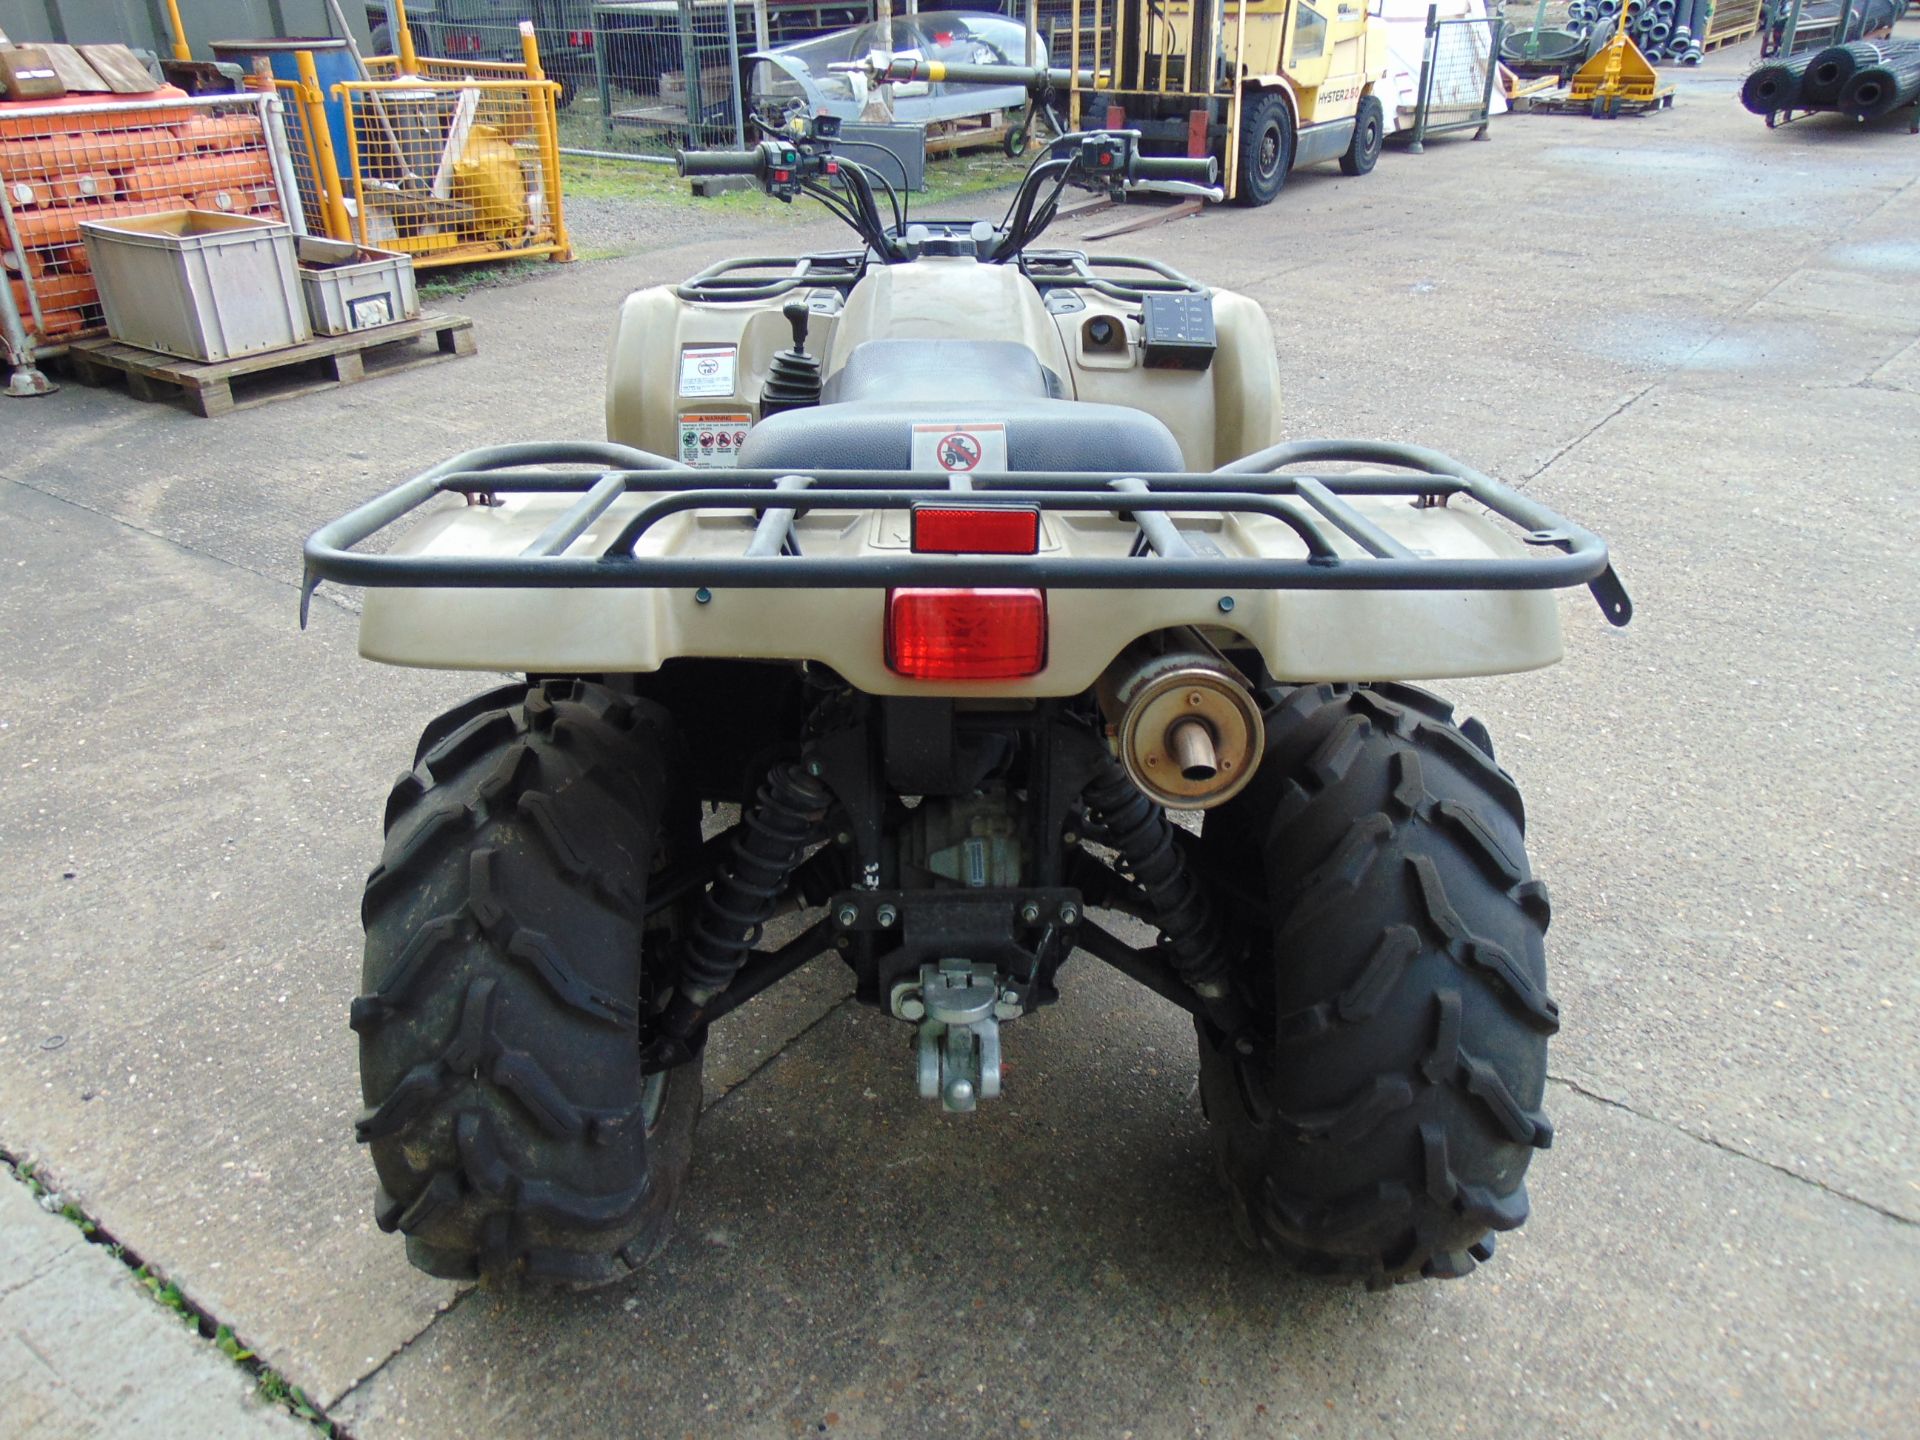 Military Specification Yamaha Grizzly 450 4 x 4 ATV Quad Bike Complete with Winch ONLY 591 HOURS! - Image 7 of 16